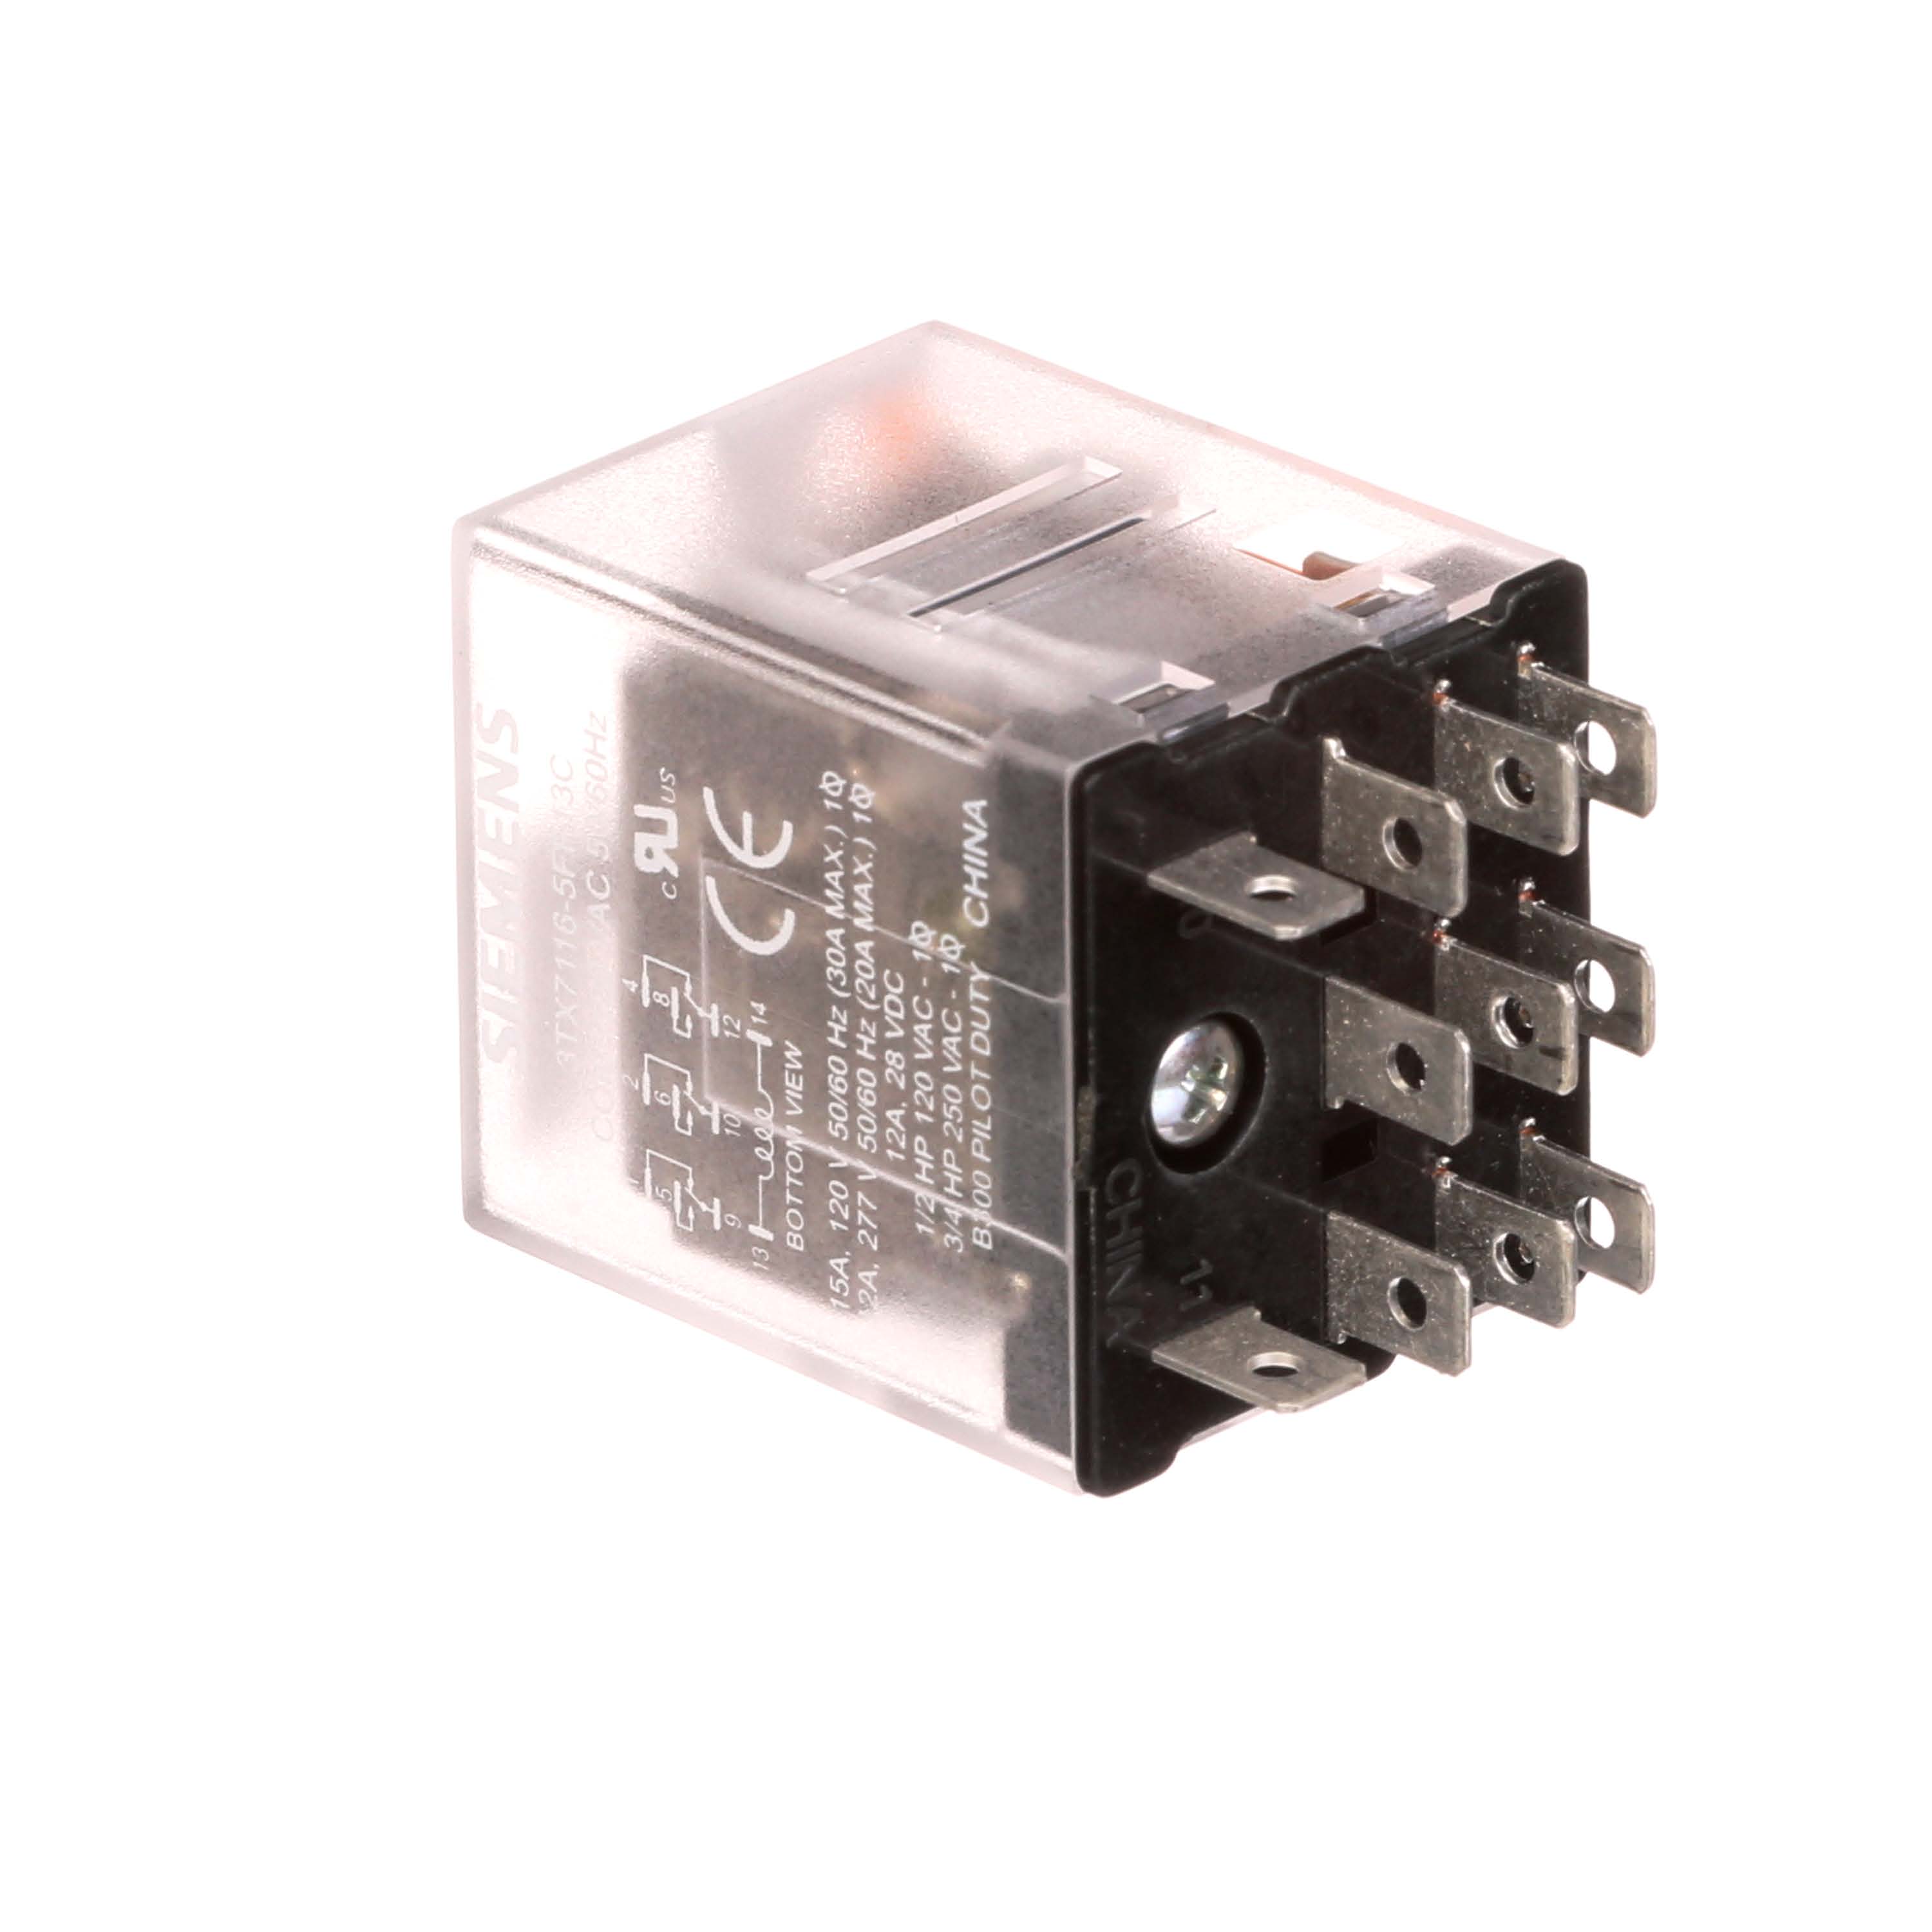 Plug-in Relay, Basic 8-pin Square Base DPDT, 15A, 24VAC Uses Socket 3TX7144-1E6or 3TX7144-4E6